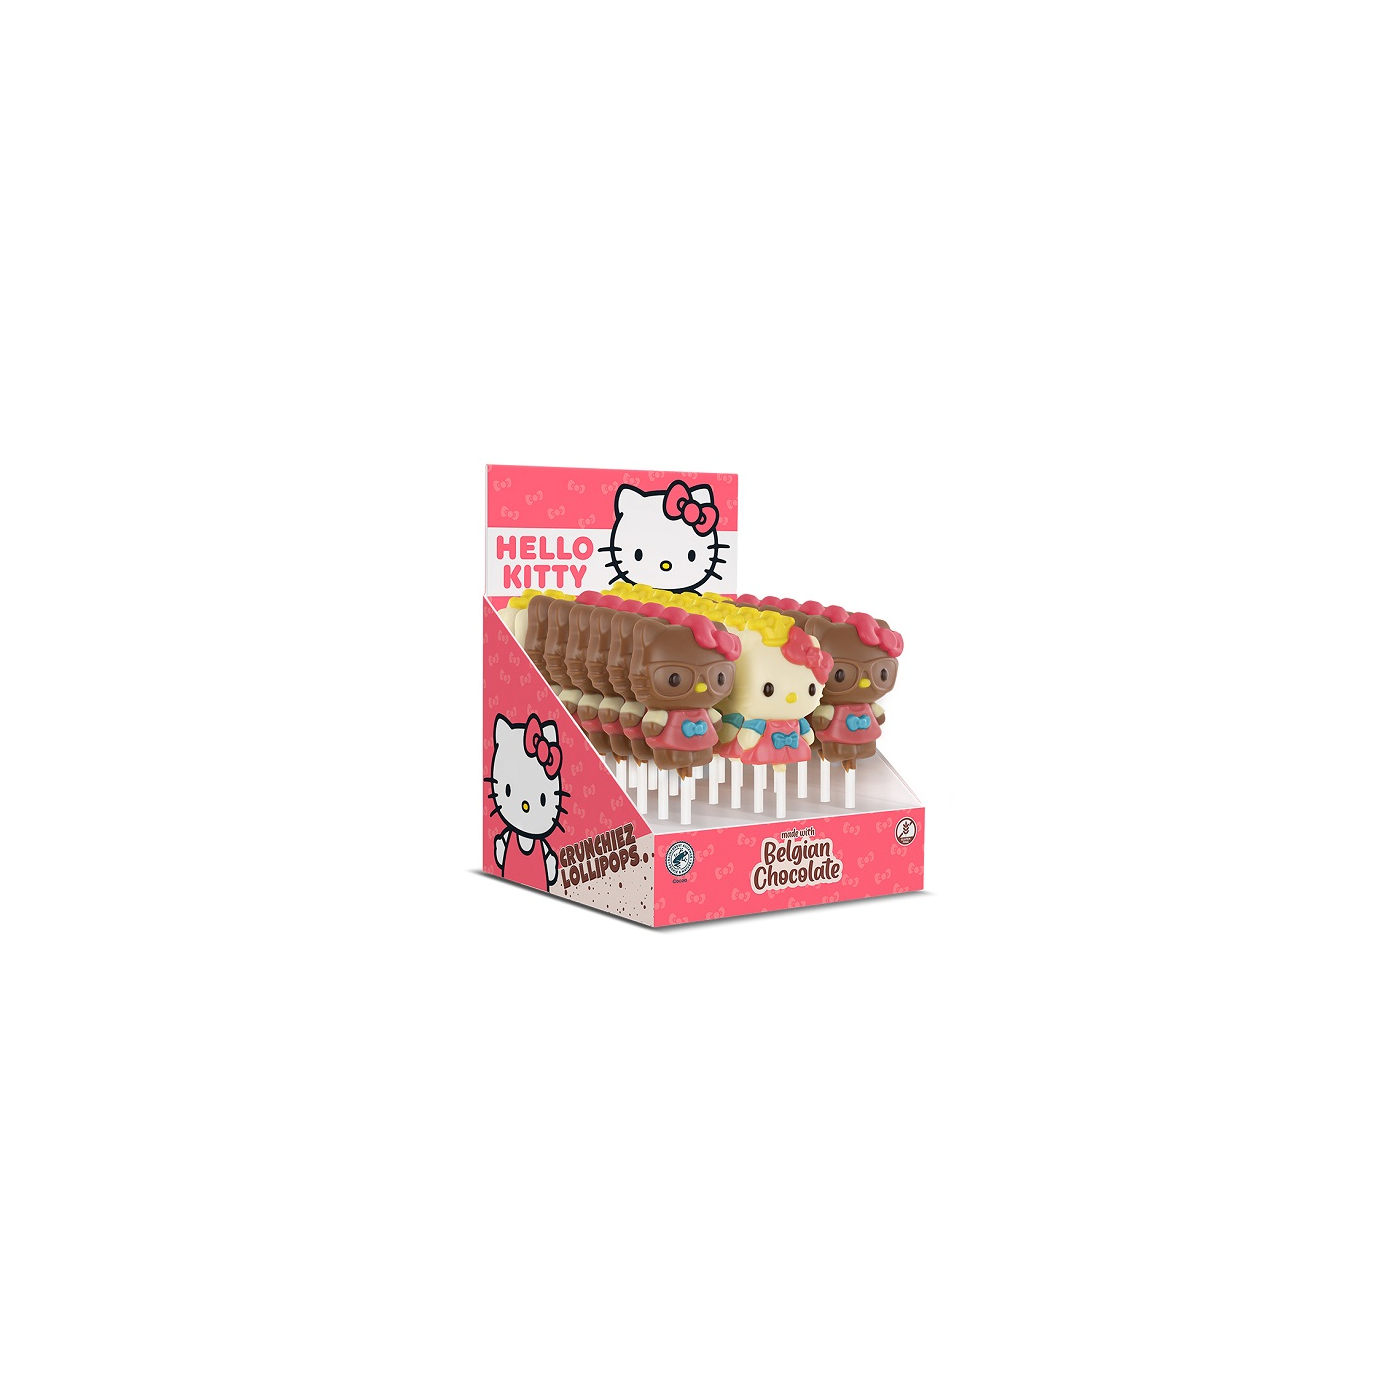 Hello Kitty Chocolade lolly melk/wit 30g 24st